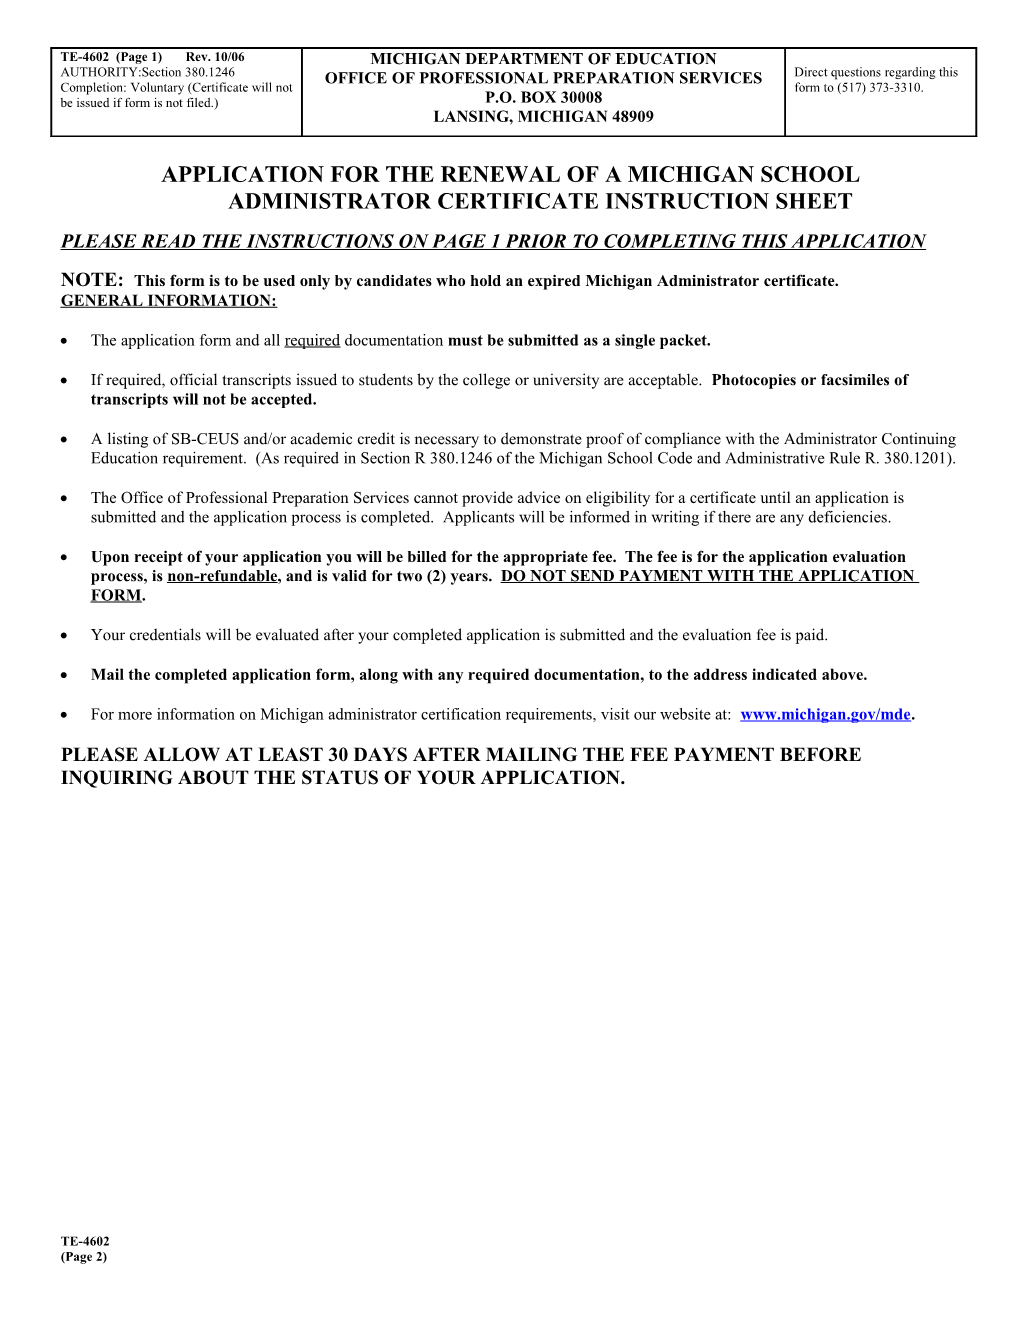 Application for the Renewal of a Michiganschool Administrator Certificate Instruction Sheet